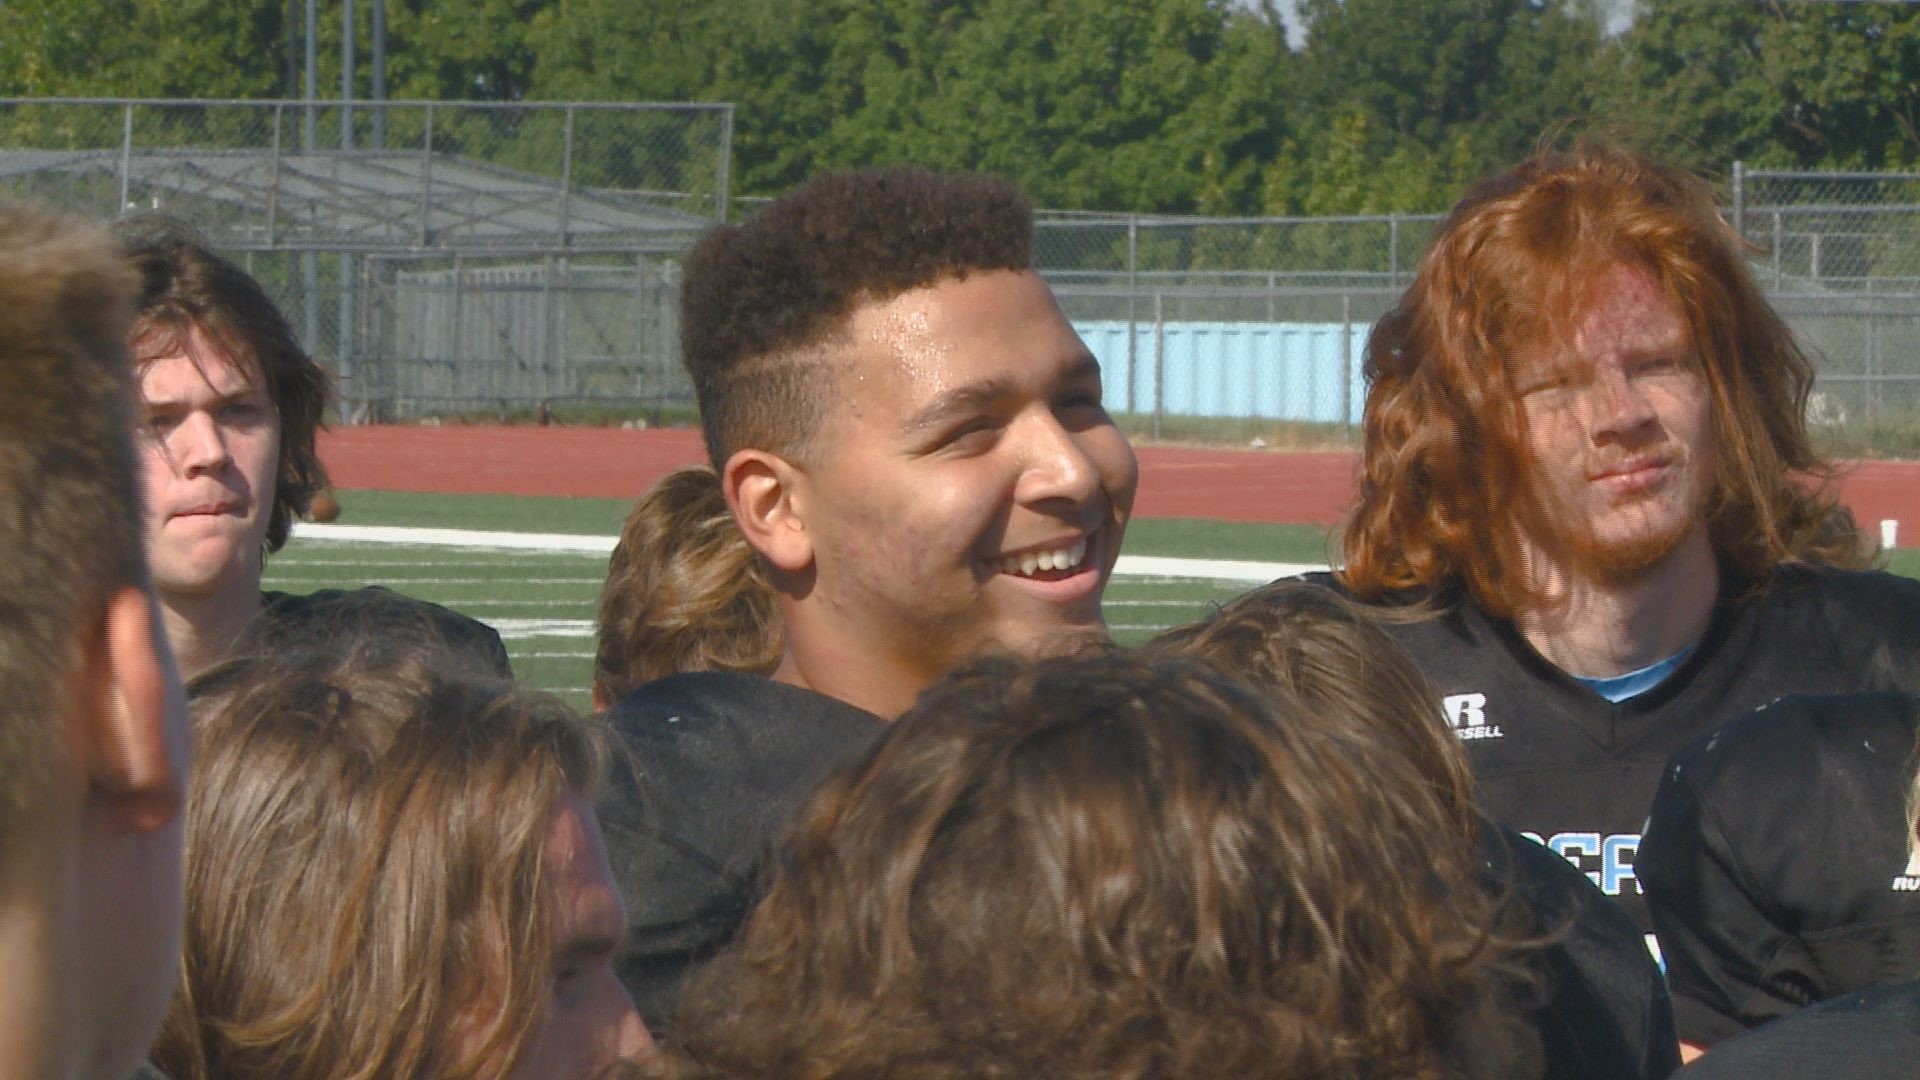 Brandon will play football this fall with a prosthetic leg and hopes to play it much longer than that.